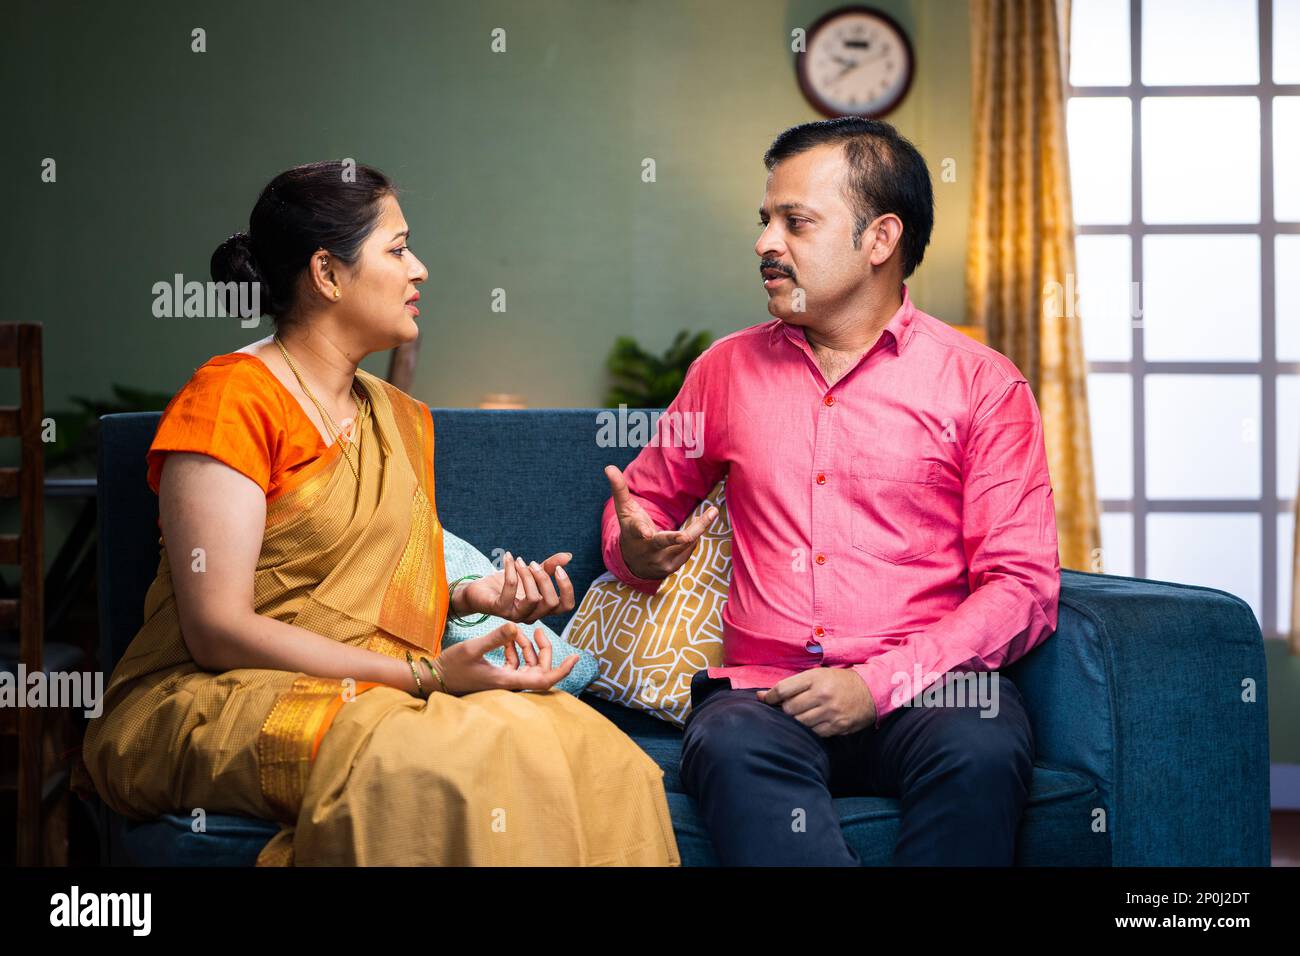 Wife got angry while arguing with husband at home - concept of relationship problems, conflict and unhappy relationship. Stock Photo